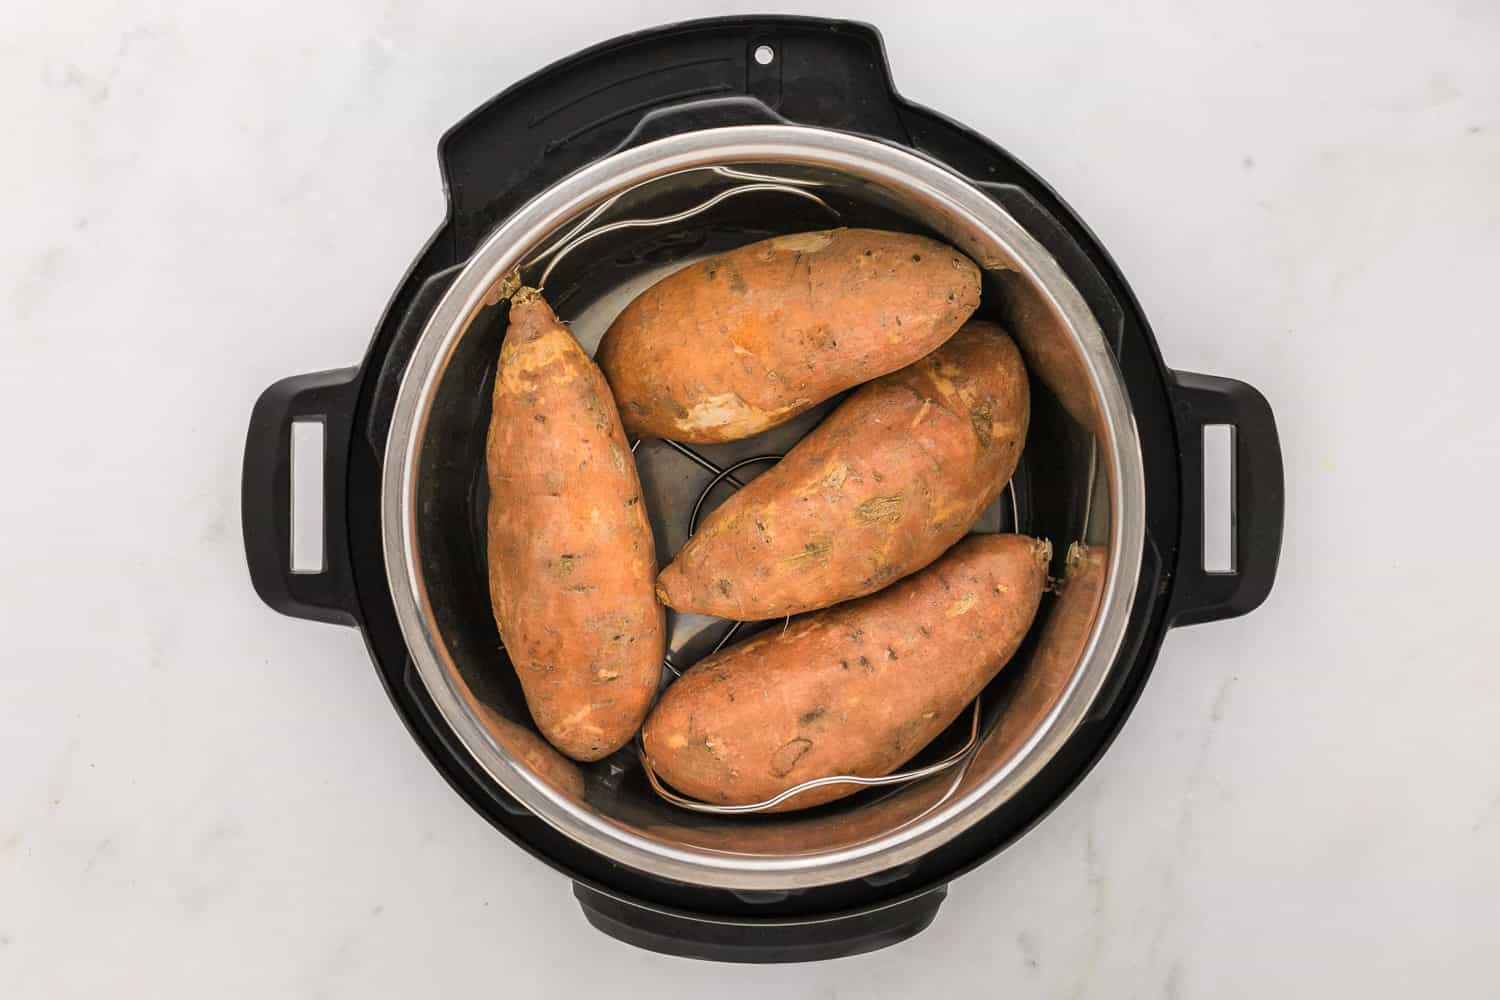 Instant pot sweet potatoes before being cooked.